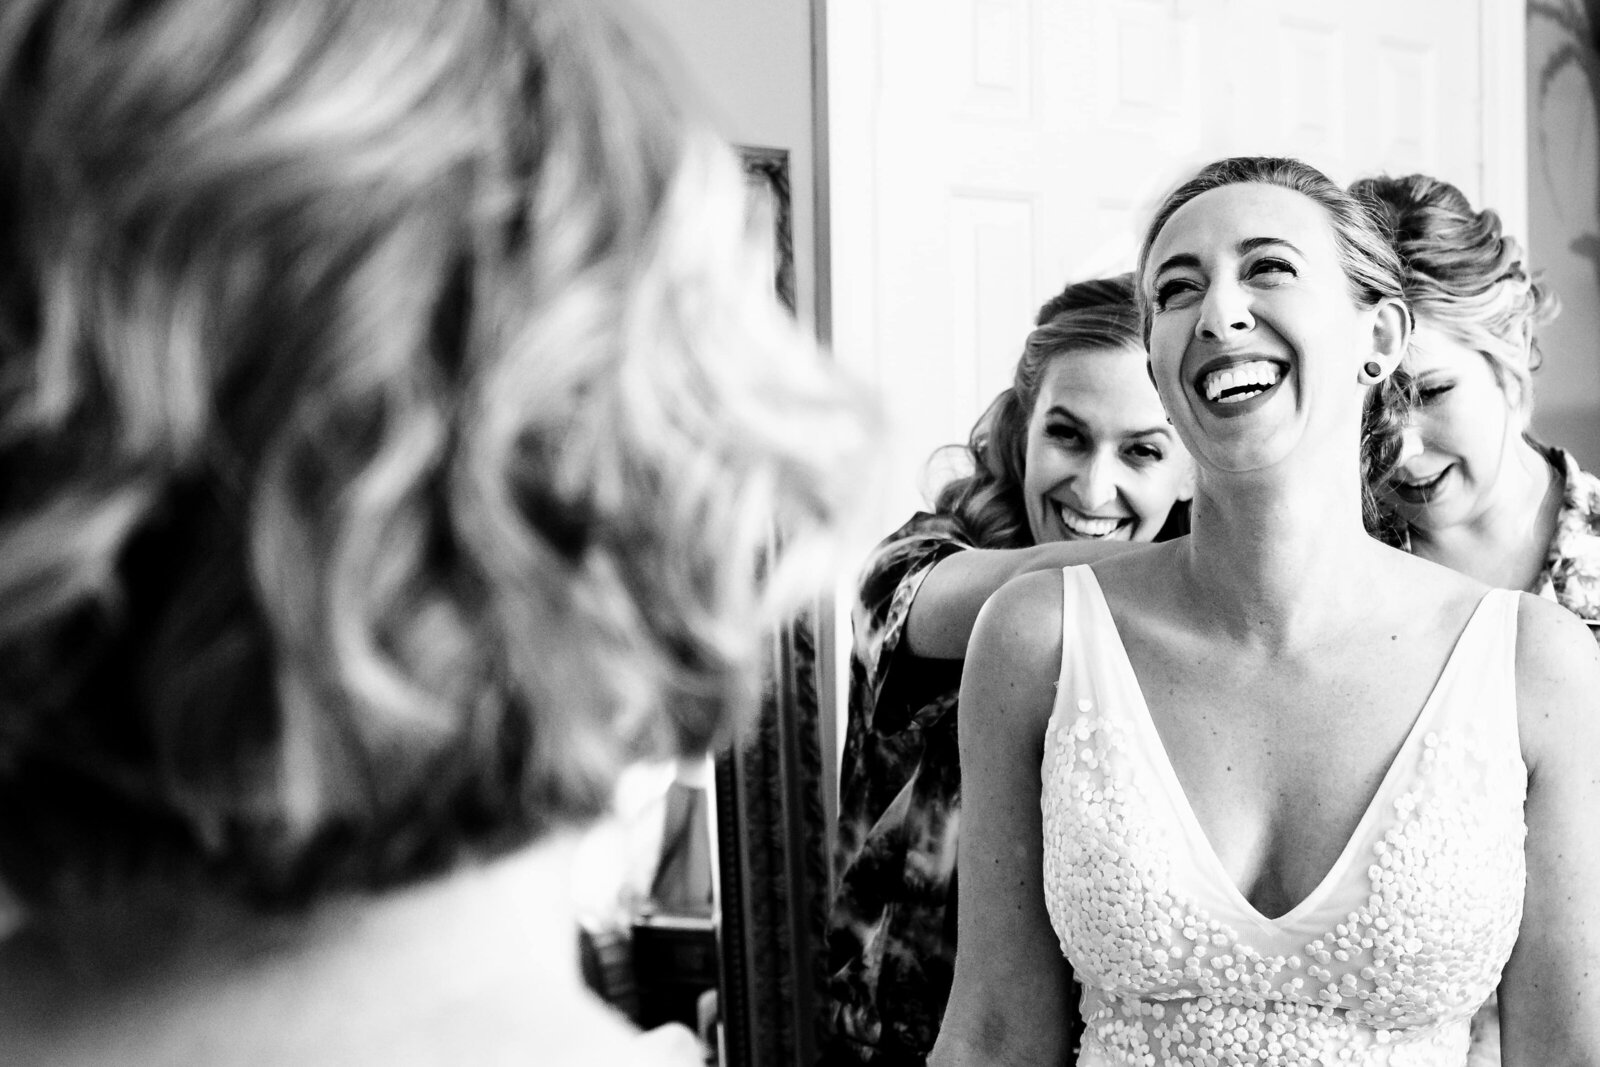 bride laughs as her bridesmaids button up her dress; the mother of the bride looks on in the foreground